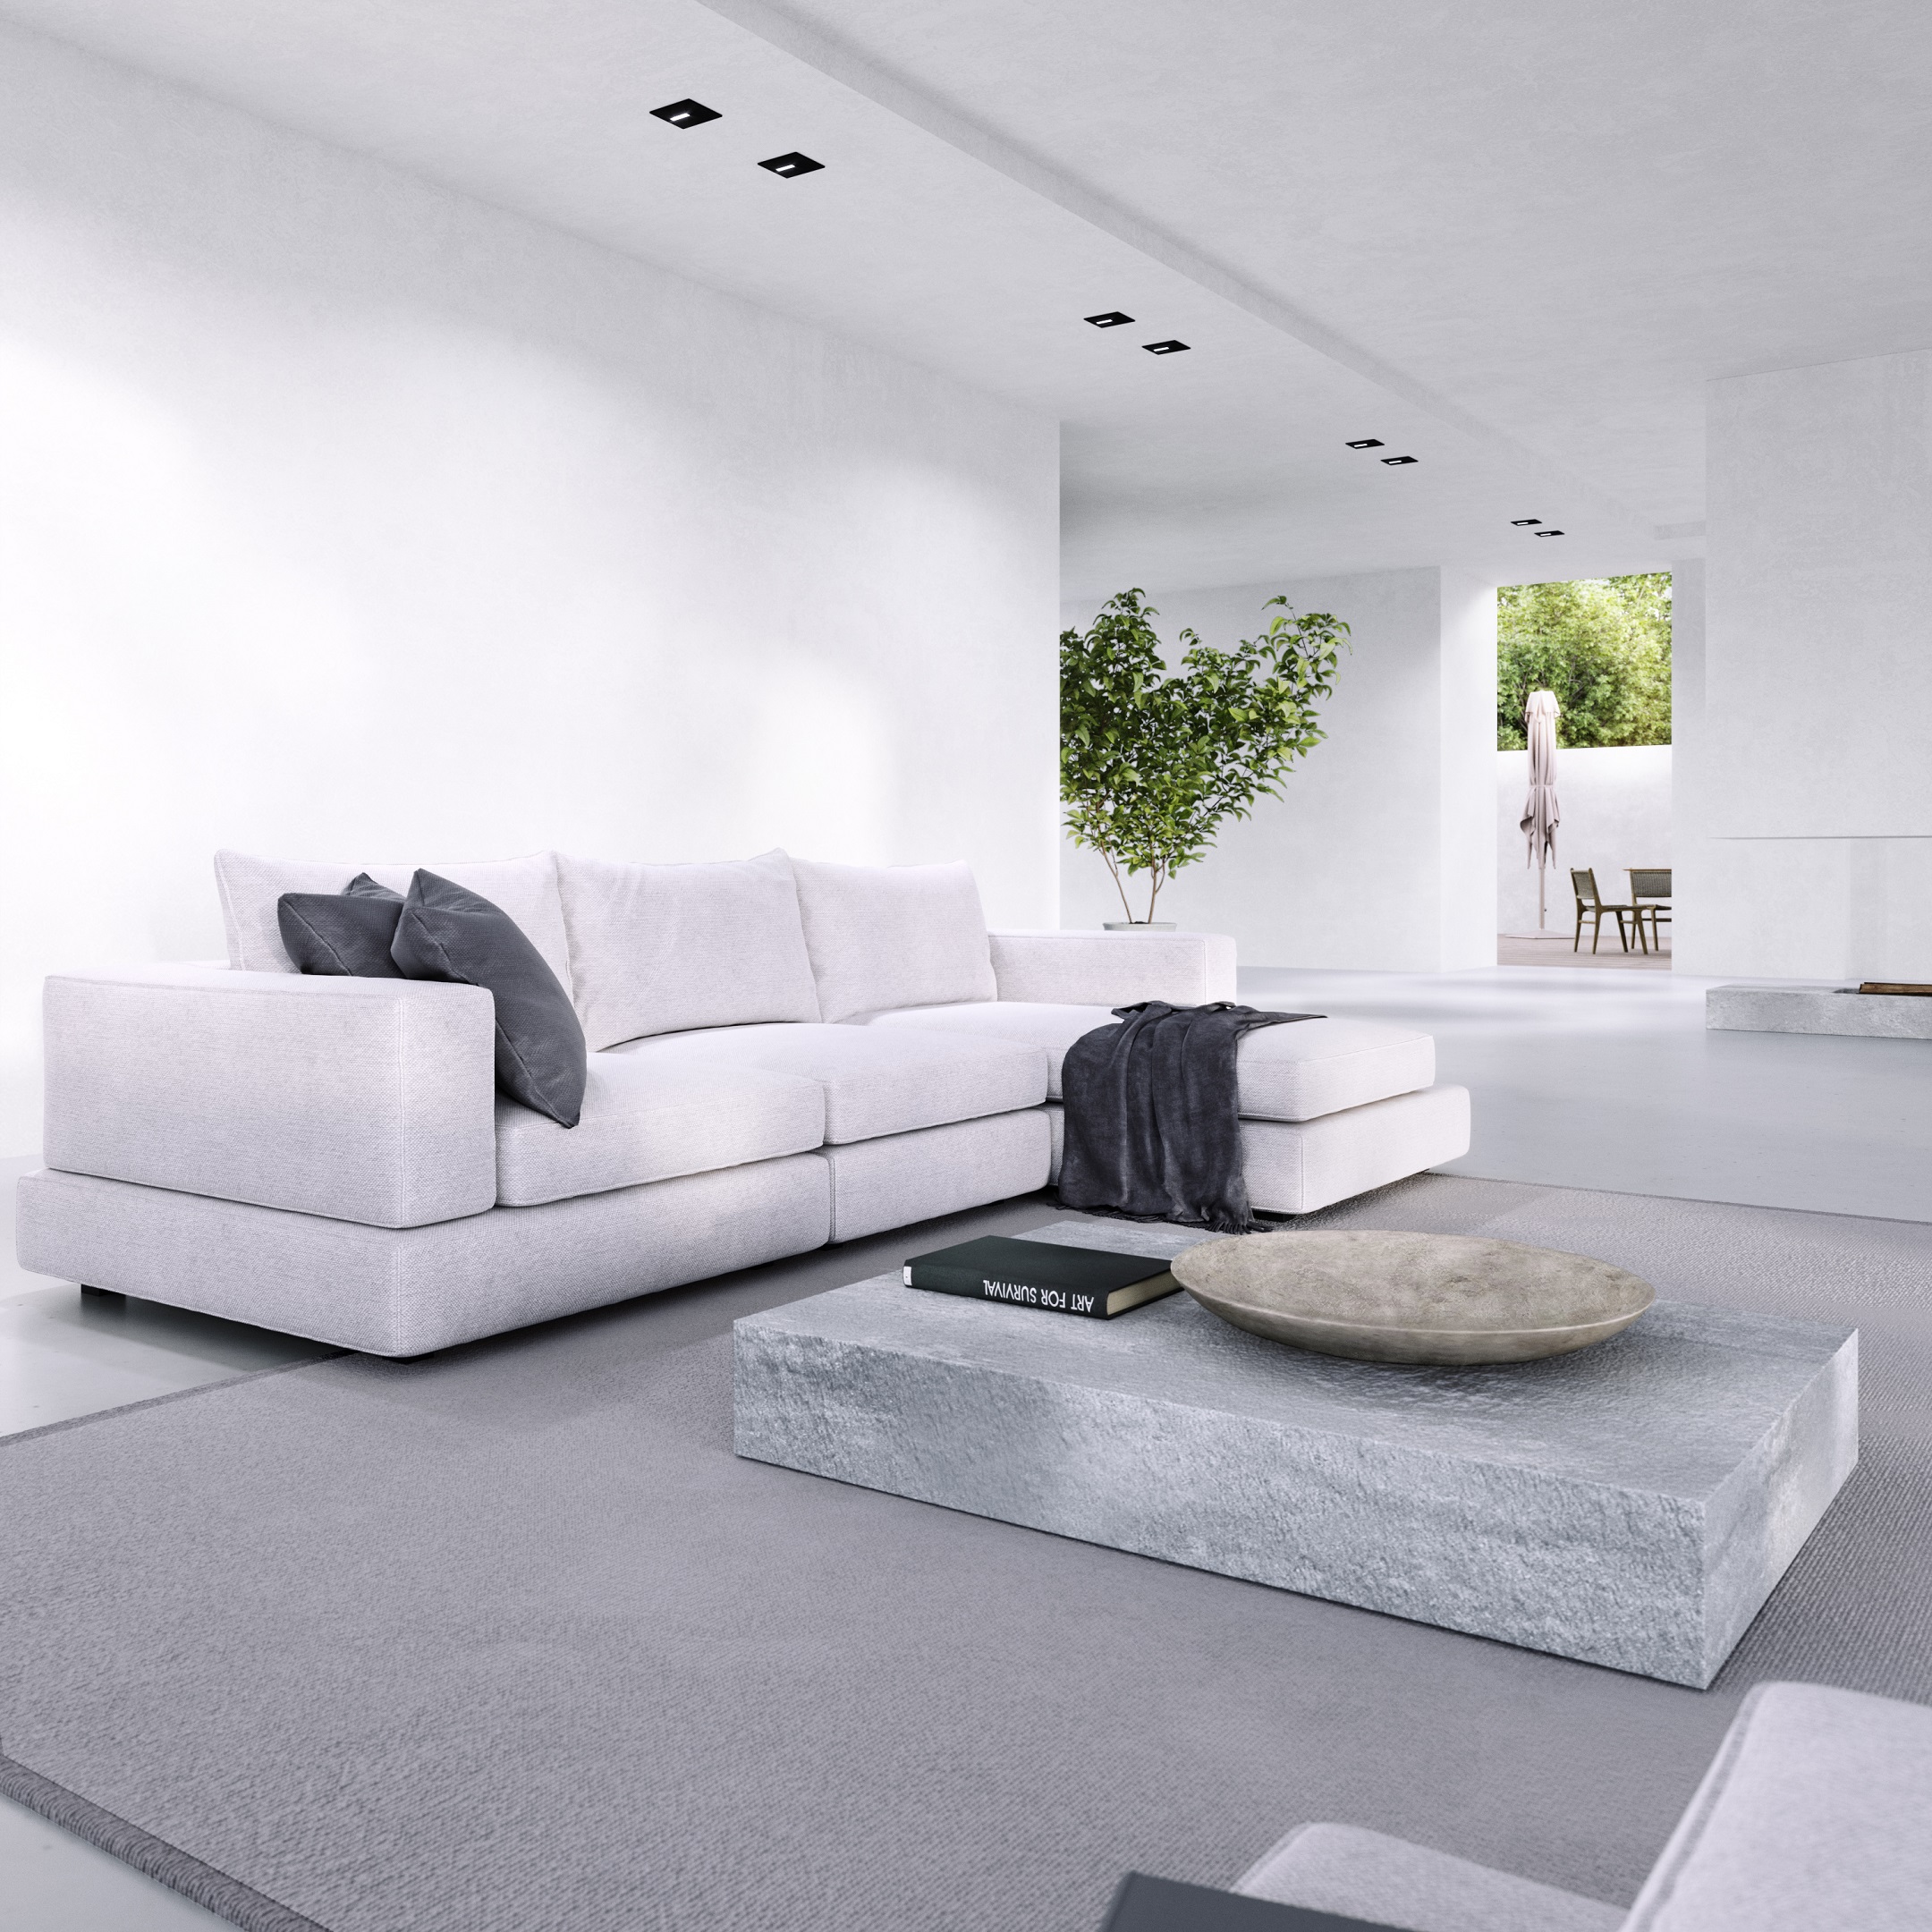 3D Visualization of a Minimalist-Style Living Room